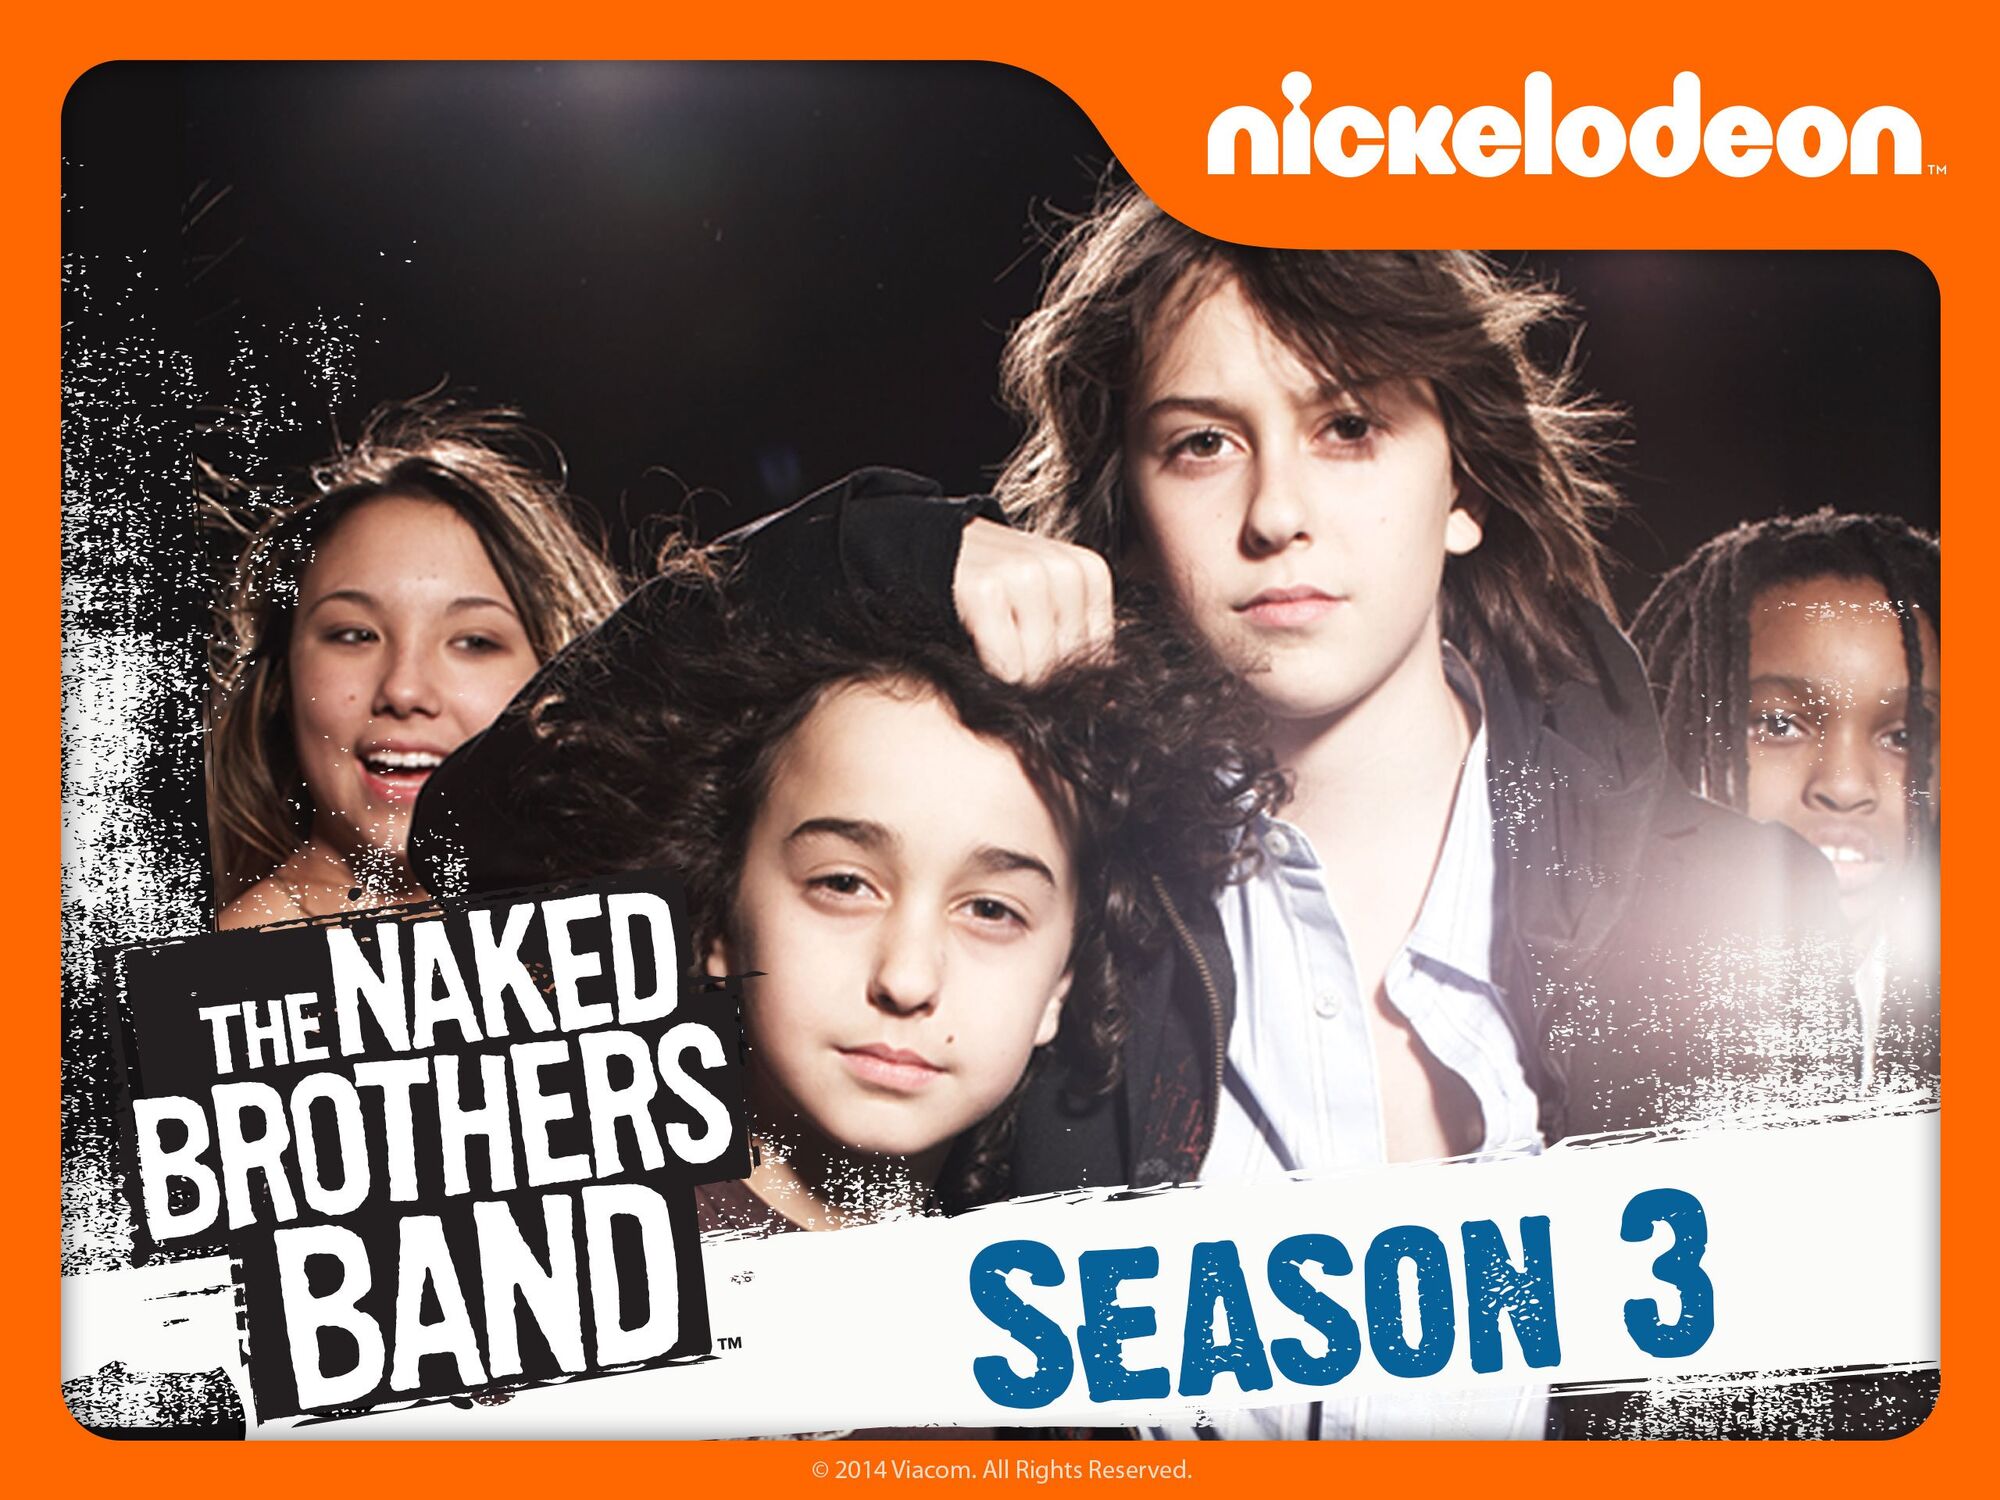 The Naked Brothers Band Season 1 - Watch full episodes 